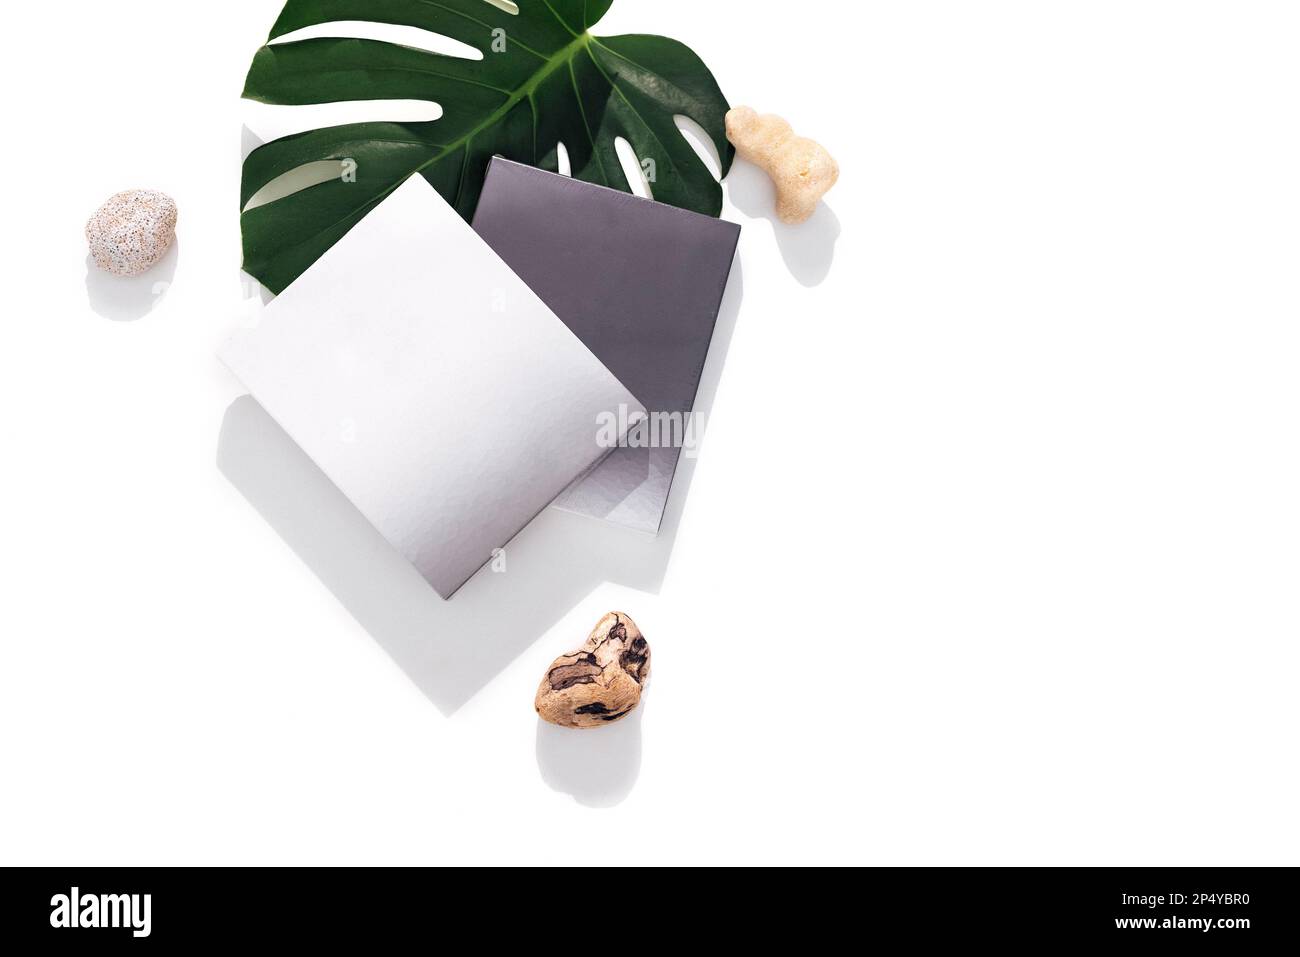 Mockup of two cardboard square boxes for cosmetics. Monstera leaf, sea pebbles on the background. White backrop. Free spase for text. Stock Photo